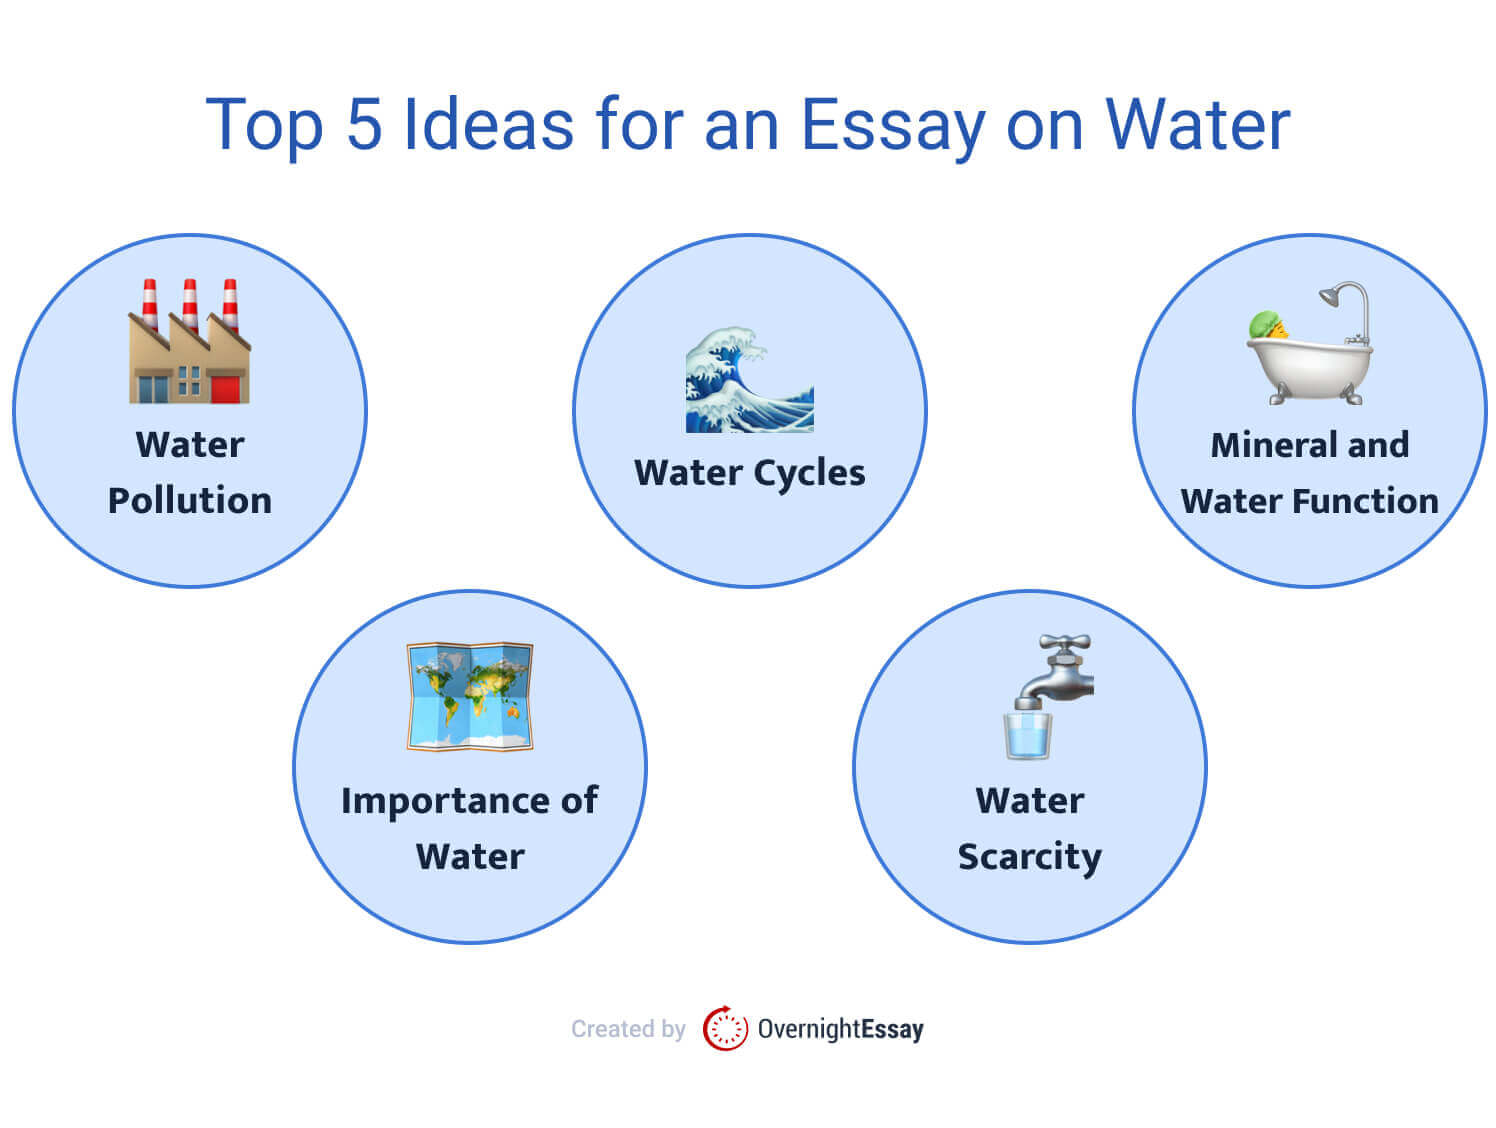 The picture provides a list of the most perspective topics for a water essay. 